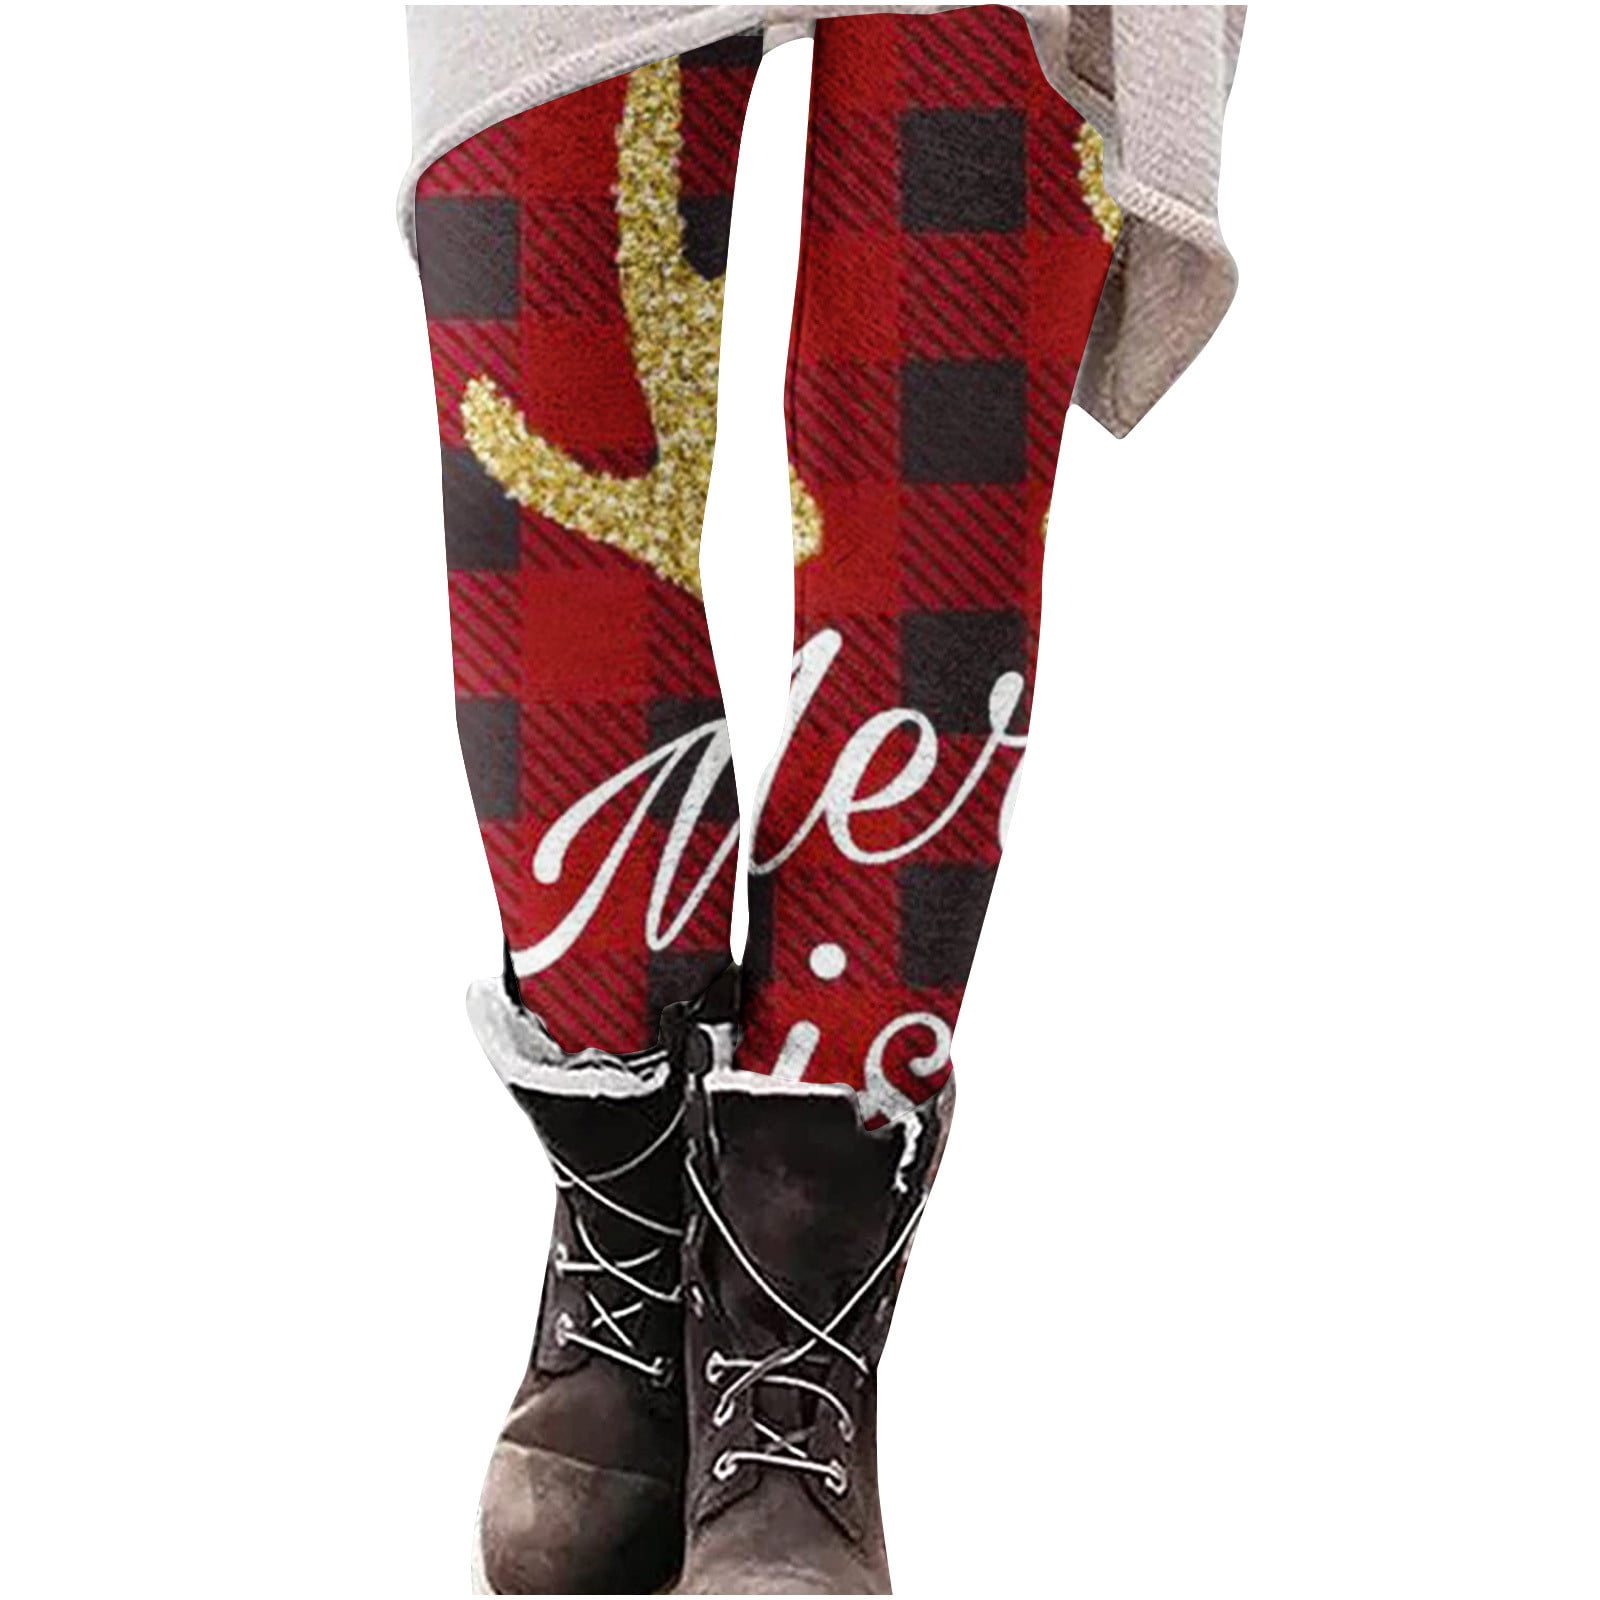 Fuzzy Leggings for Women Women's Autumn And Winter Fashion Christmas Print  Slim Boots Trousers Women's Leggings Fleece Lined Leggings Soft Clouds